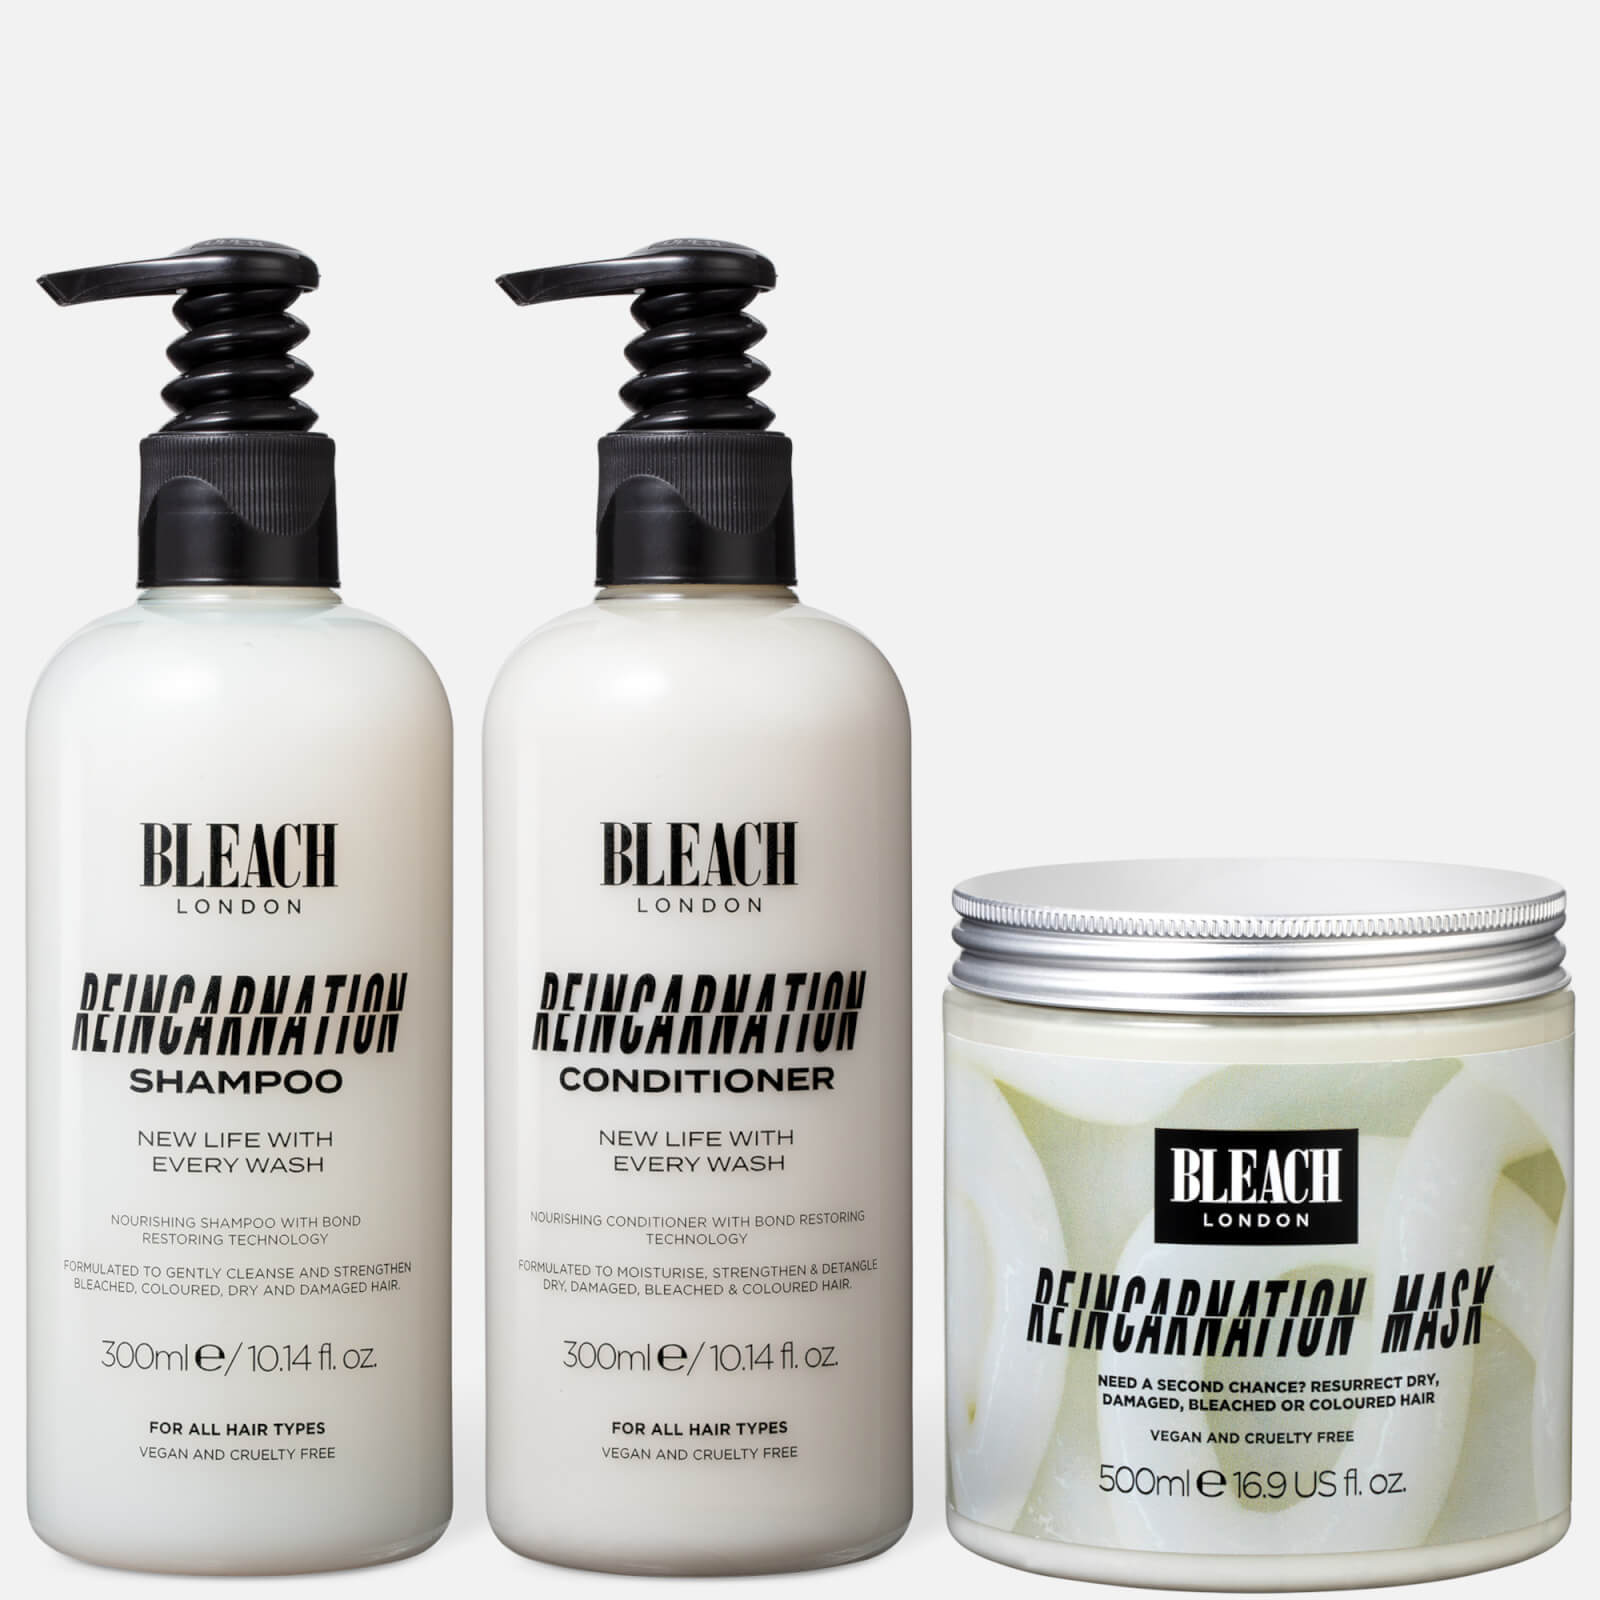 Image of Bleach Reincarnation Shampoo and Conditioner 300ml Bundle with 500ml Reincarnation Mask